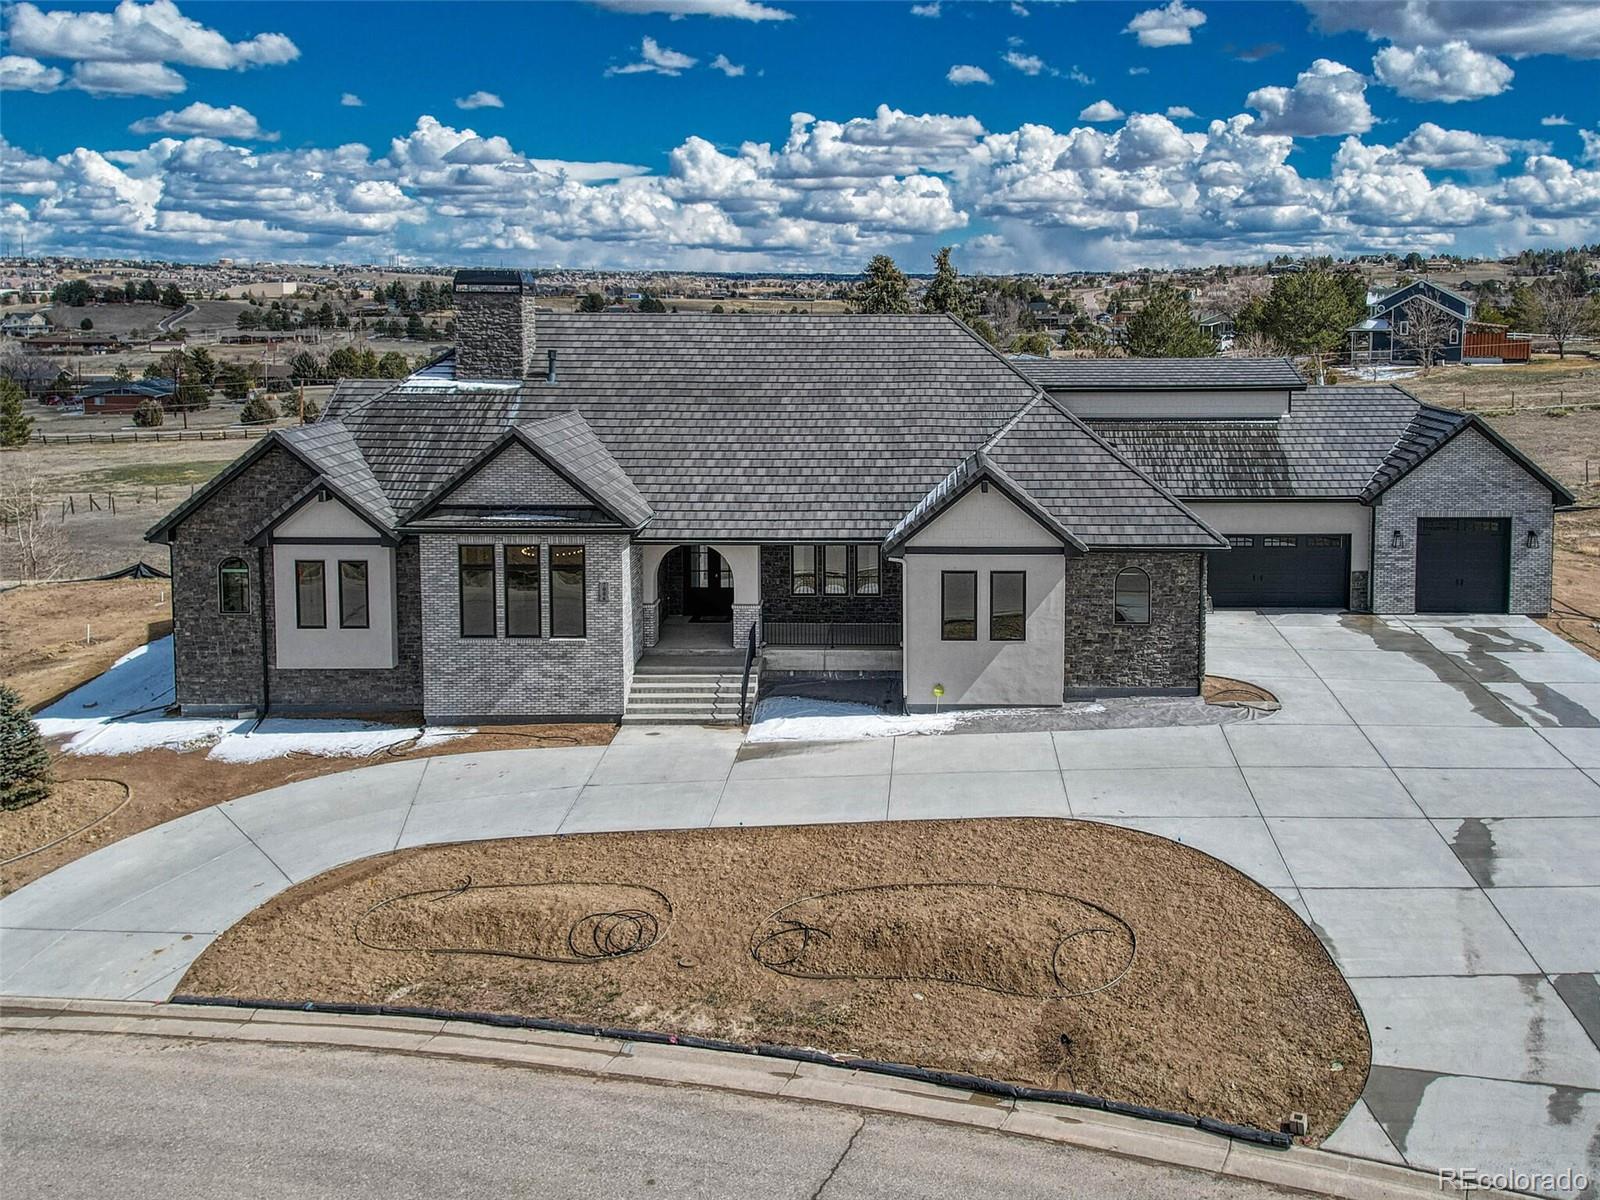 7006  espana way, centennial sold home. Closed on 2023-09-22 for $2,930,000.